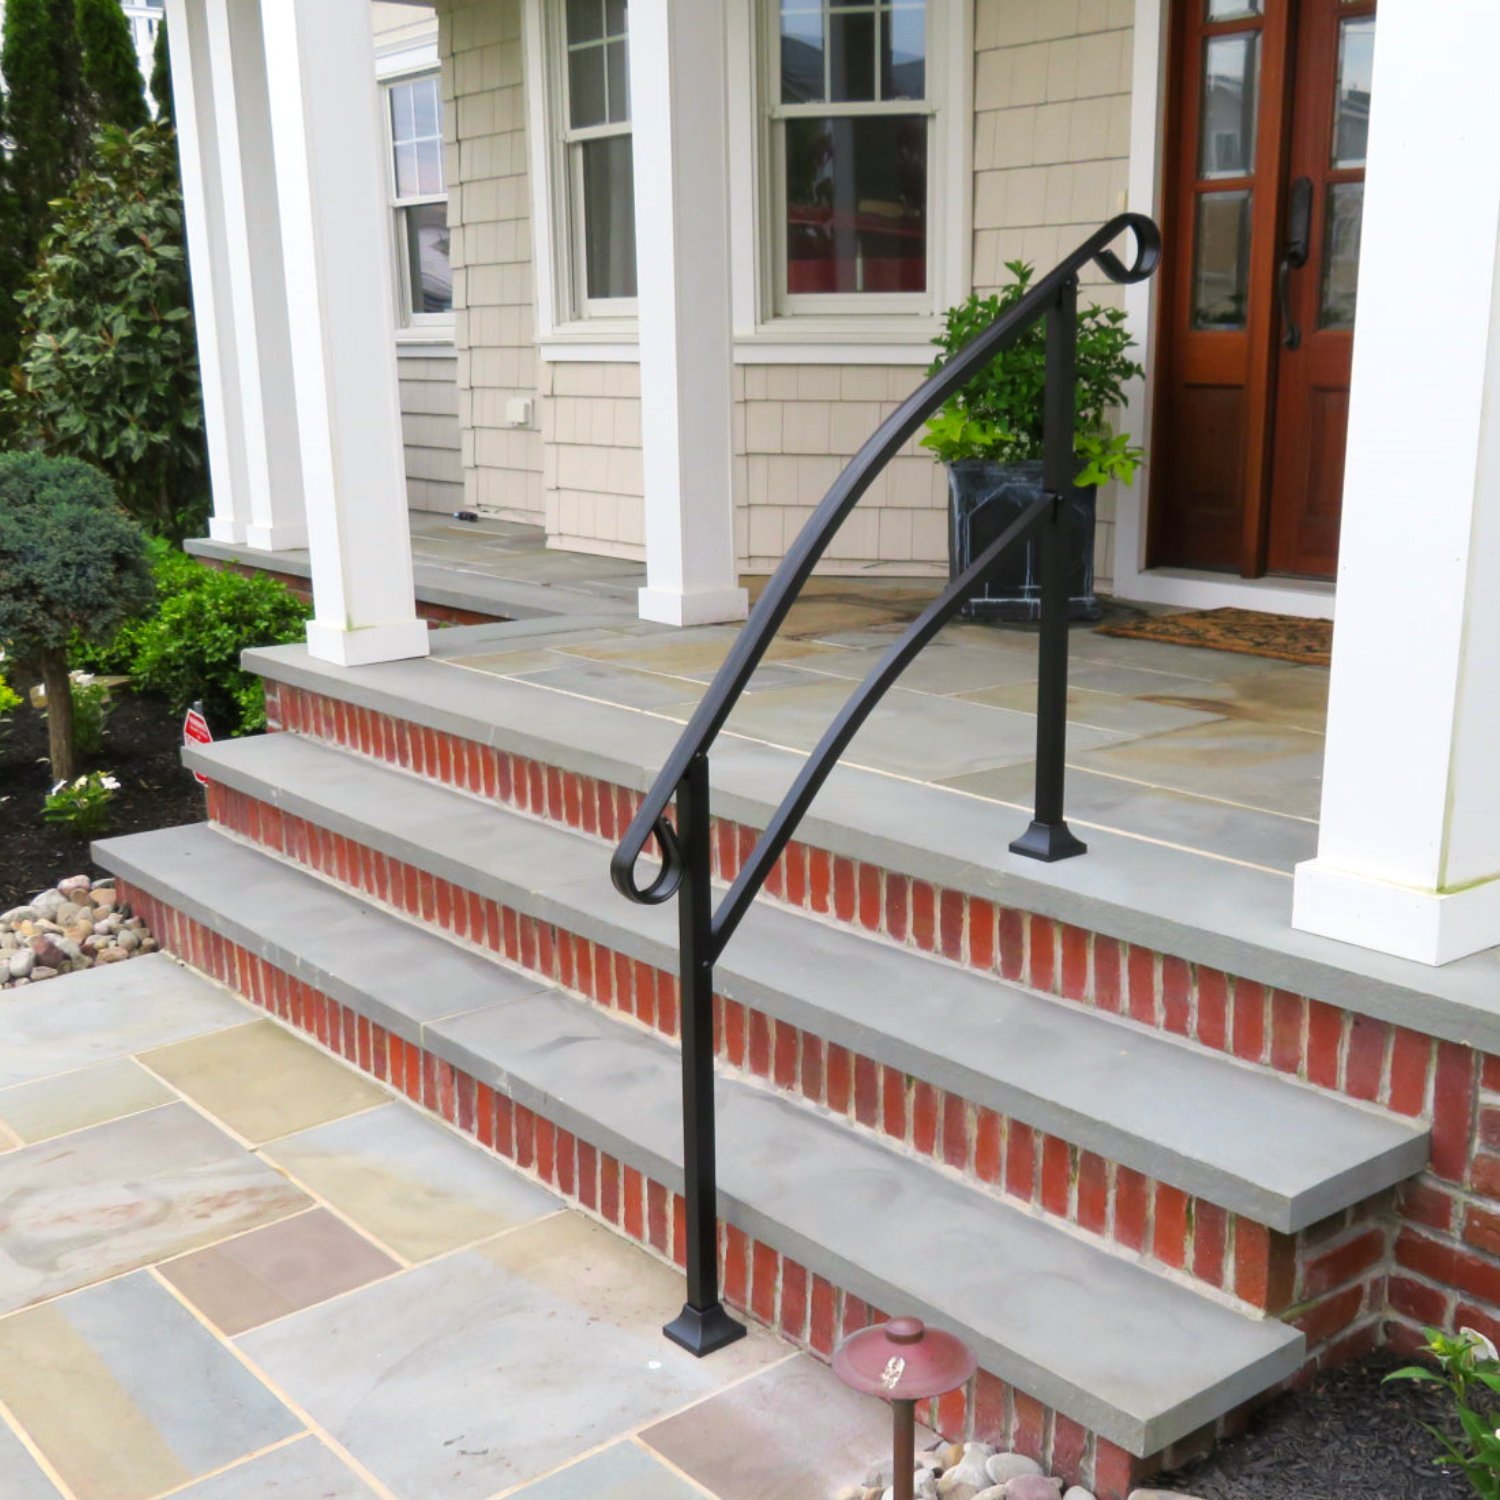 Porch Hand Rails - Designs, Kits and More